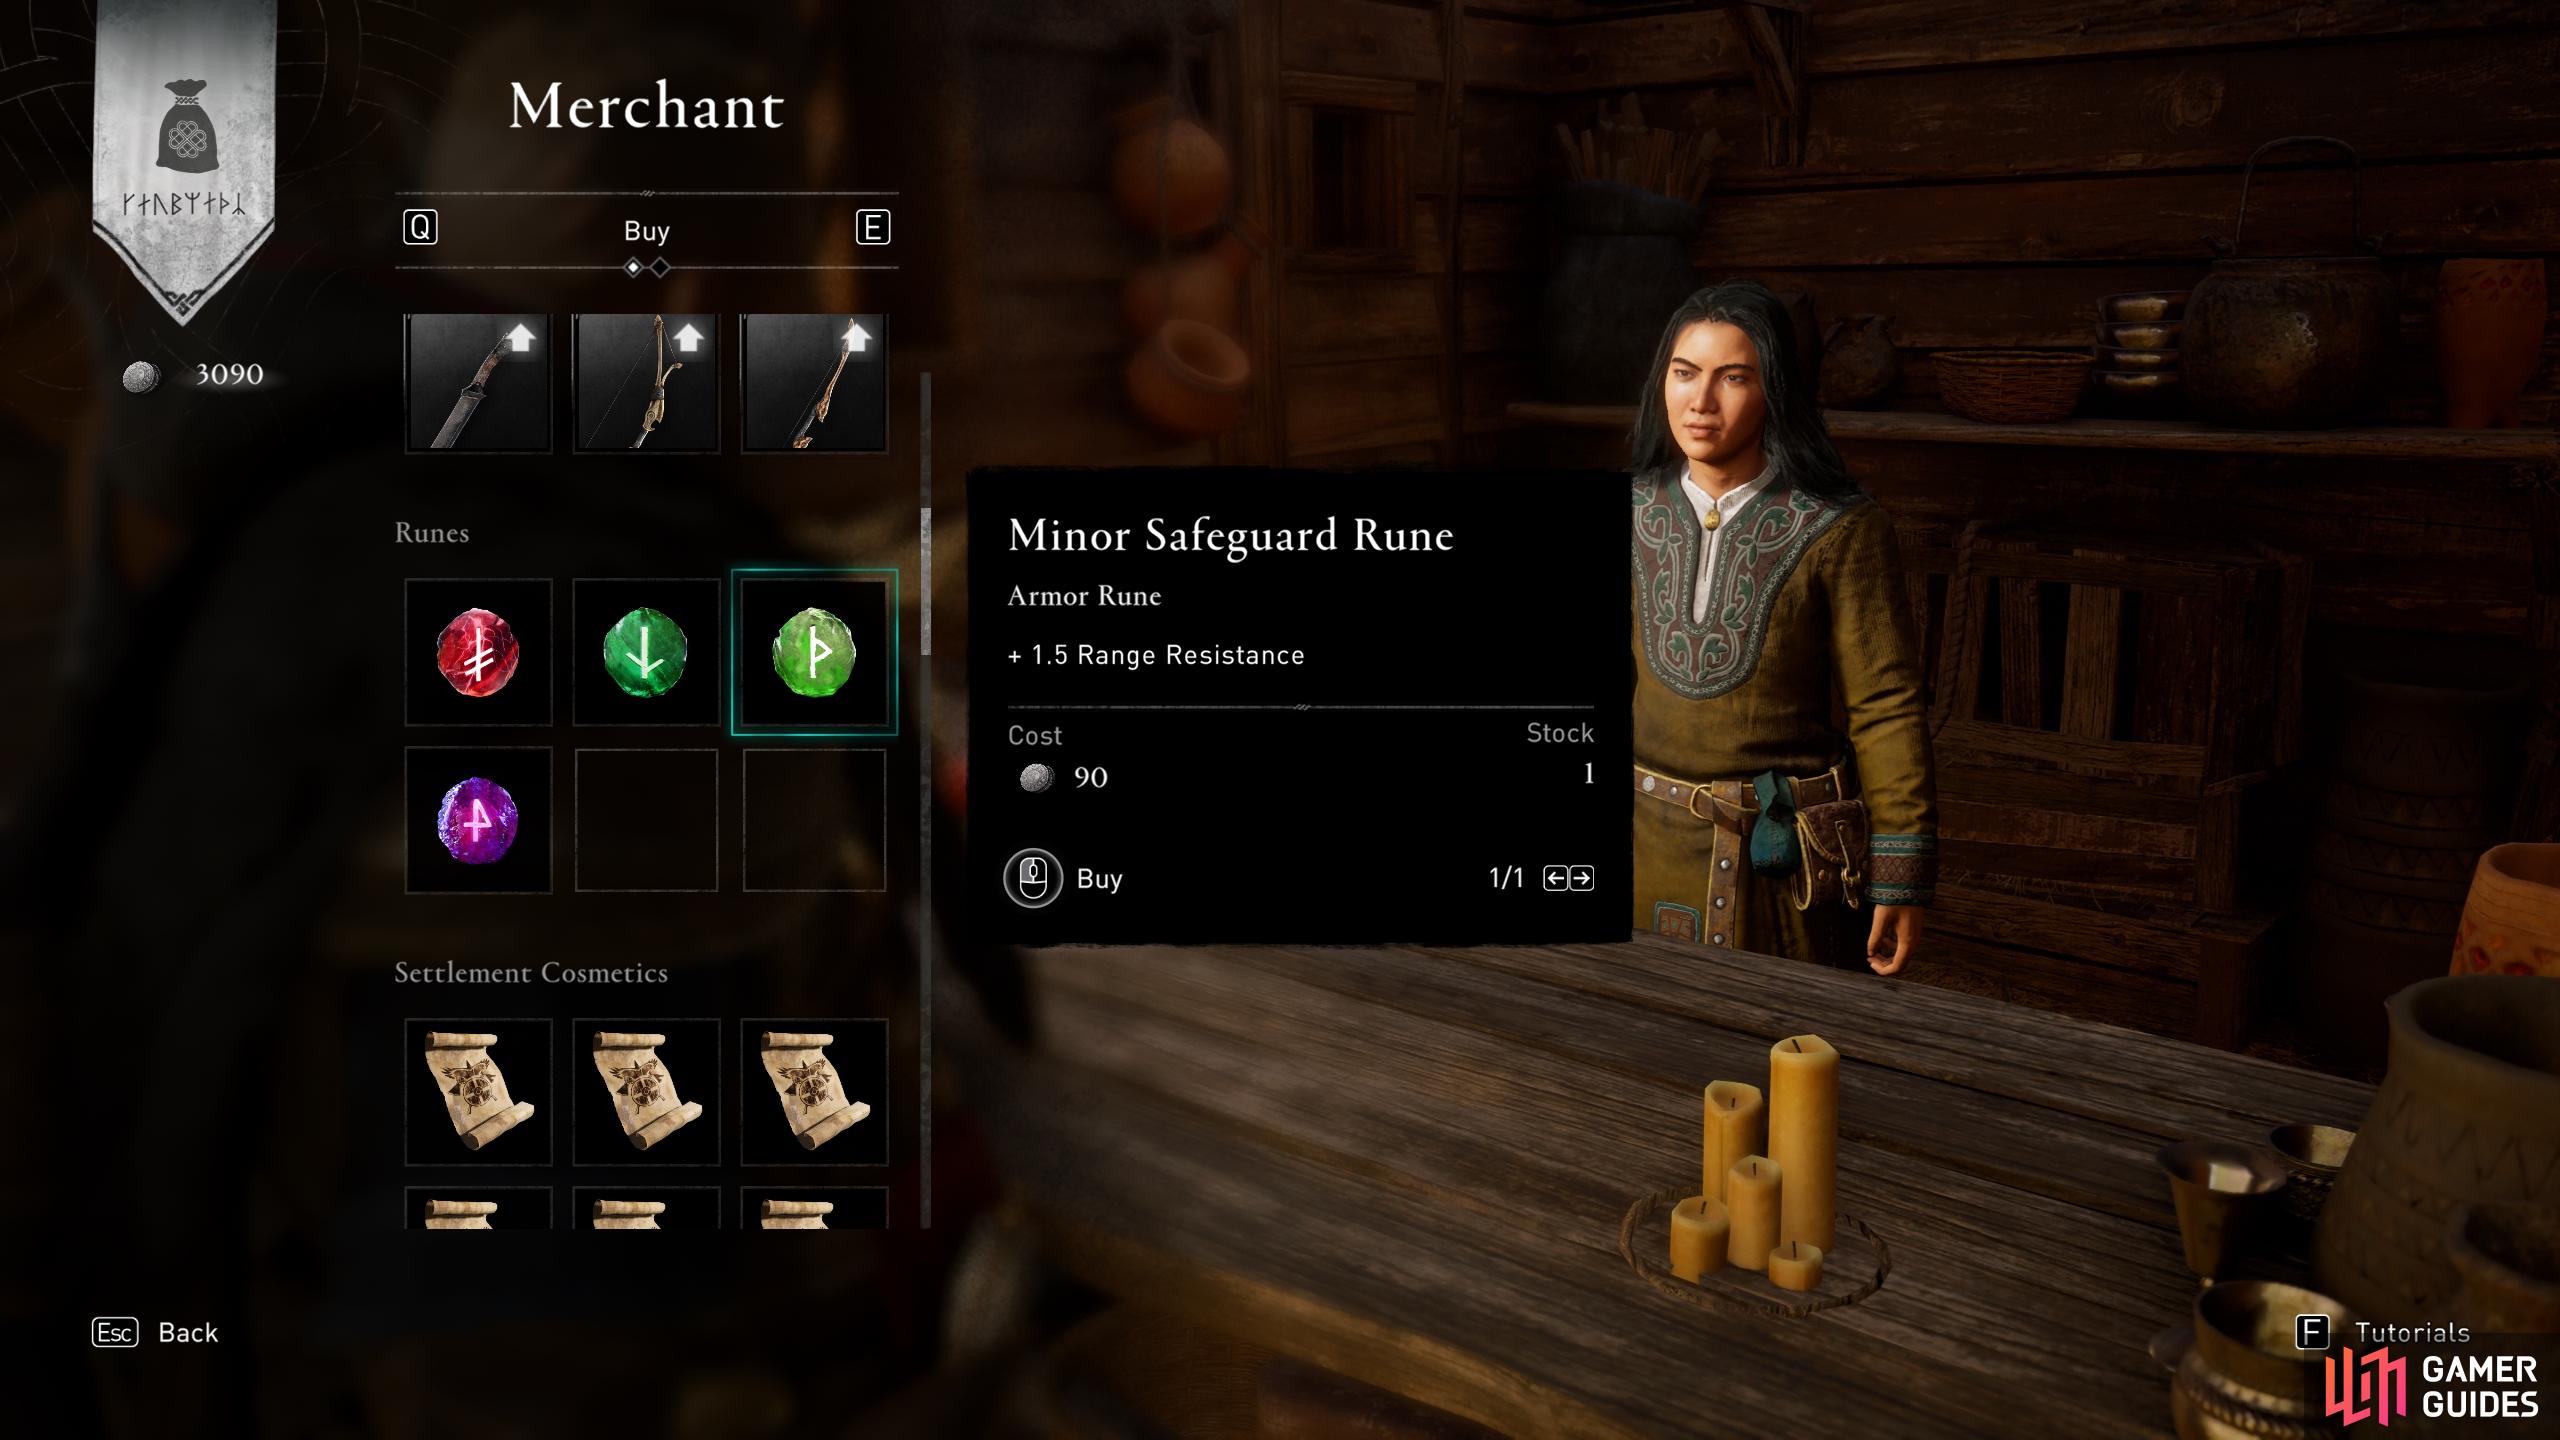 The trading post will provide you with a shop for runes, weapons, schematics, basic materials and more.